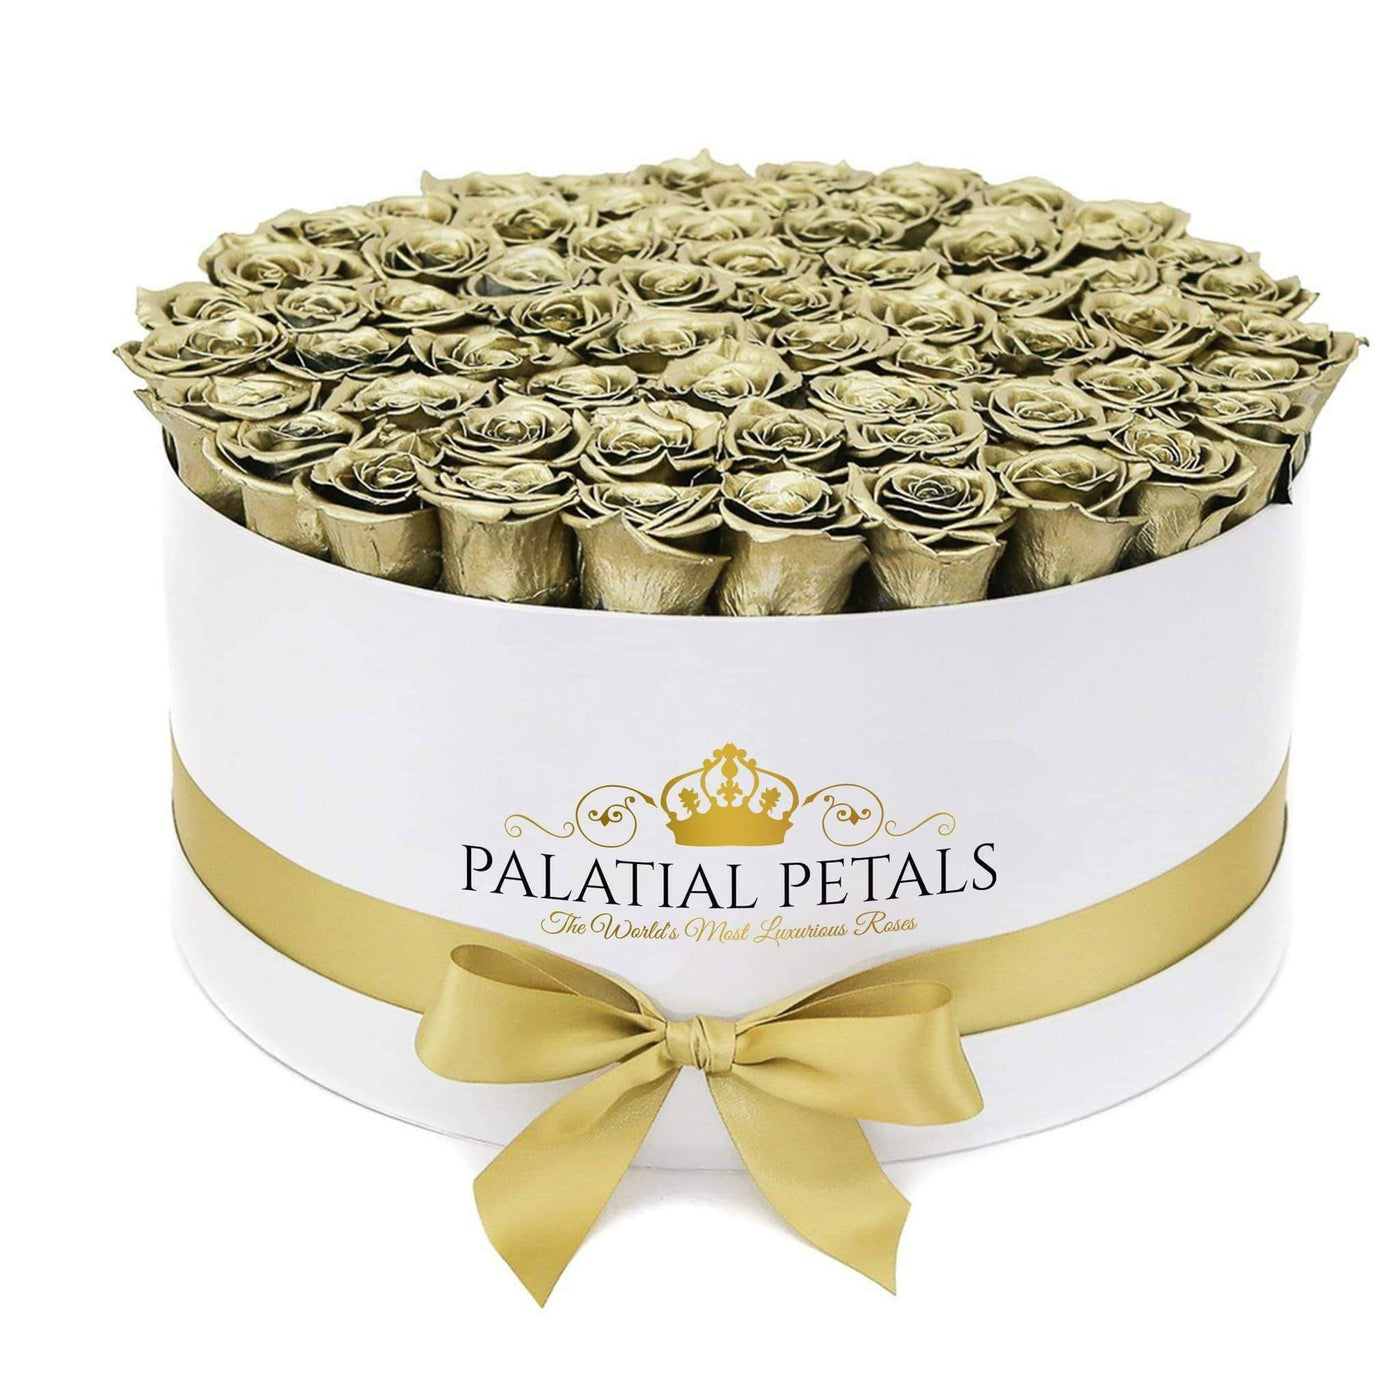 24k Gold Roses That Last A Year - Deluxe